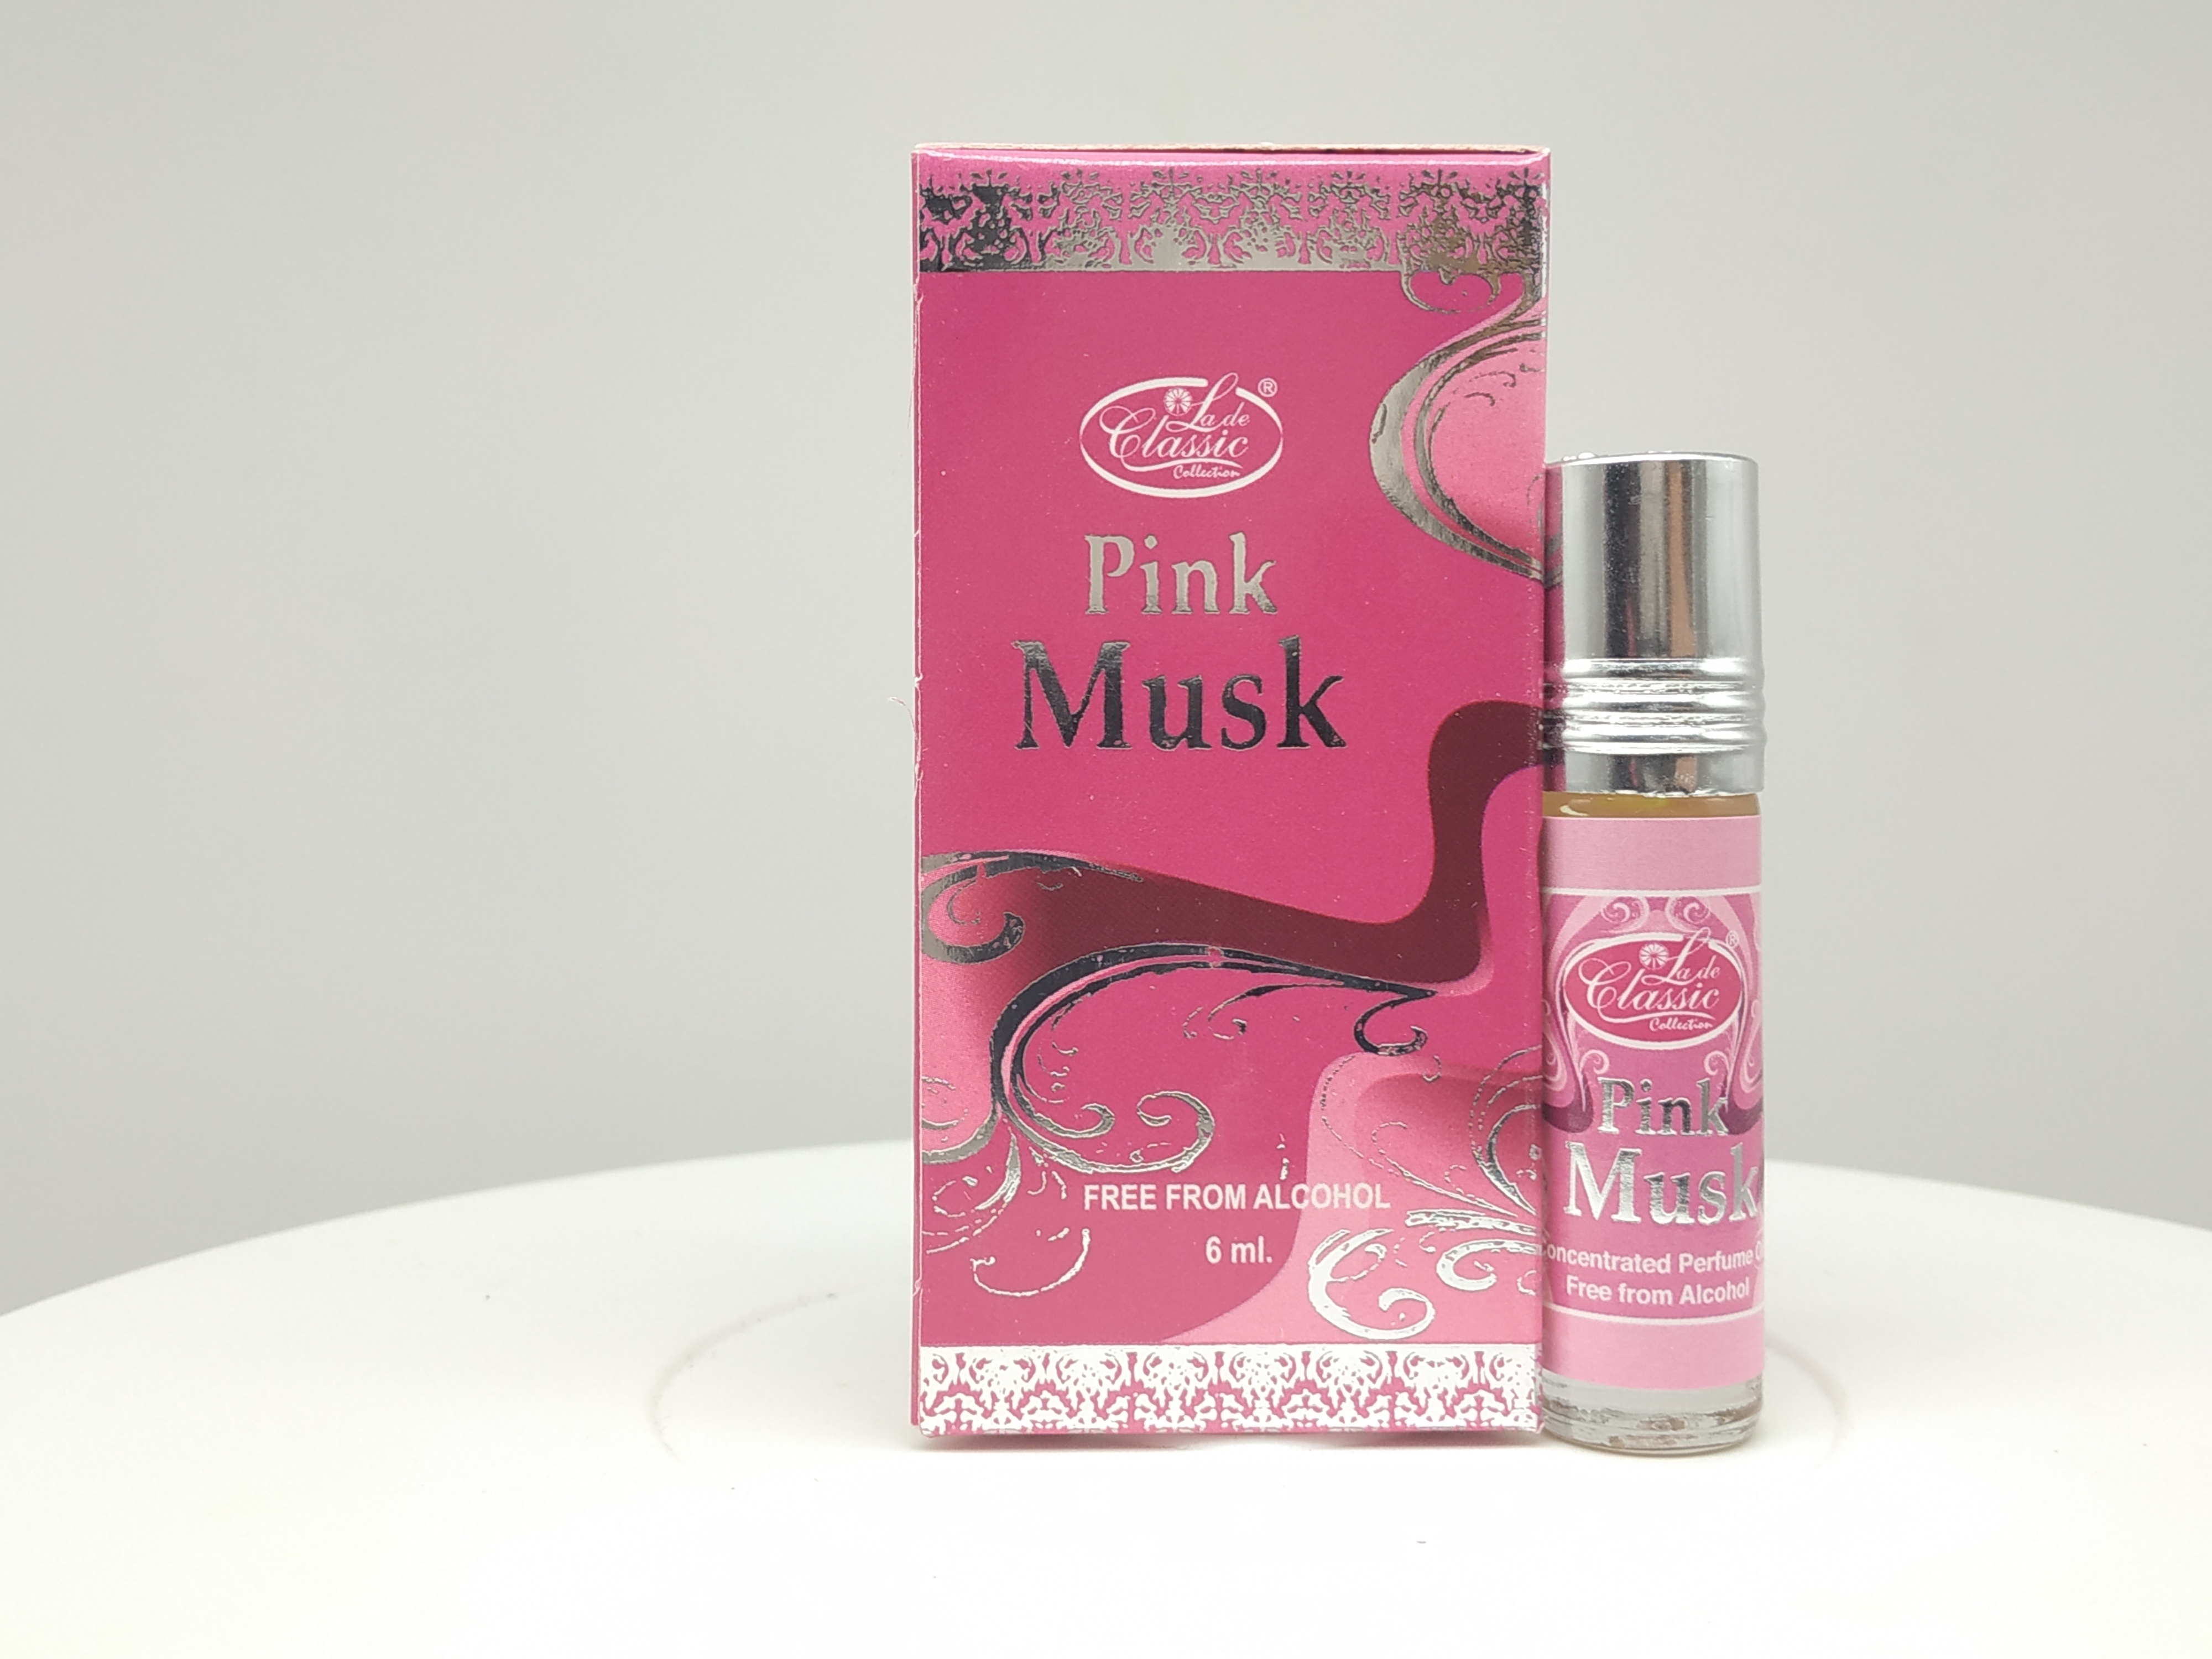 Lade Classic Ла де Классик 6 МЛ PINK MUSK МАСЛЯНЫЕ ДУХИ Духи-масло 6 мл - к...